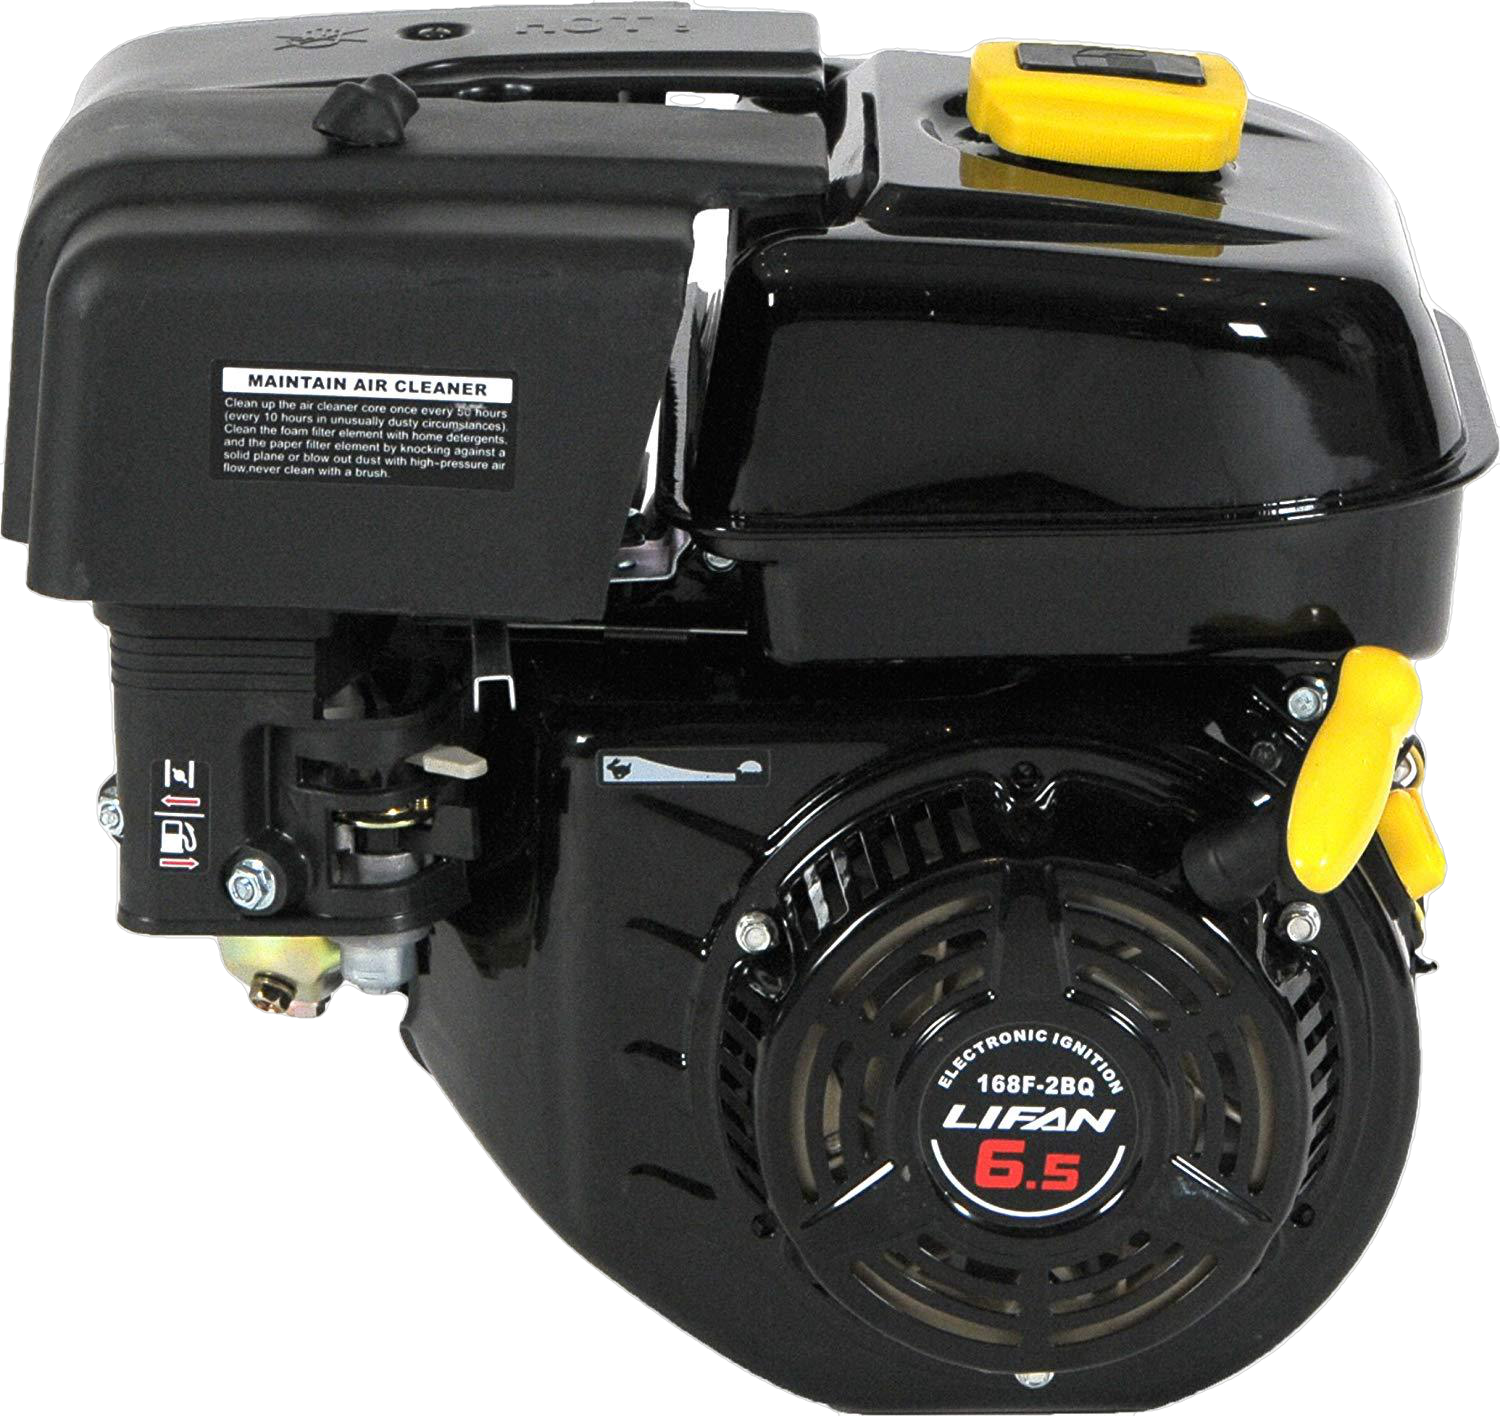 Lifan LF168F-2BDQ 6.5 HP 196cc 4-Stroke OHV Gas Engine with Electric Start, 3 Amp Open Box (Never Used)